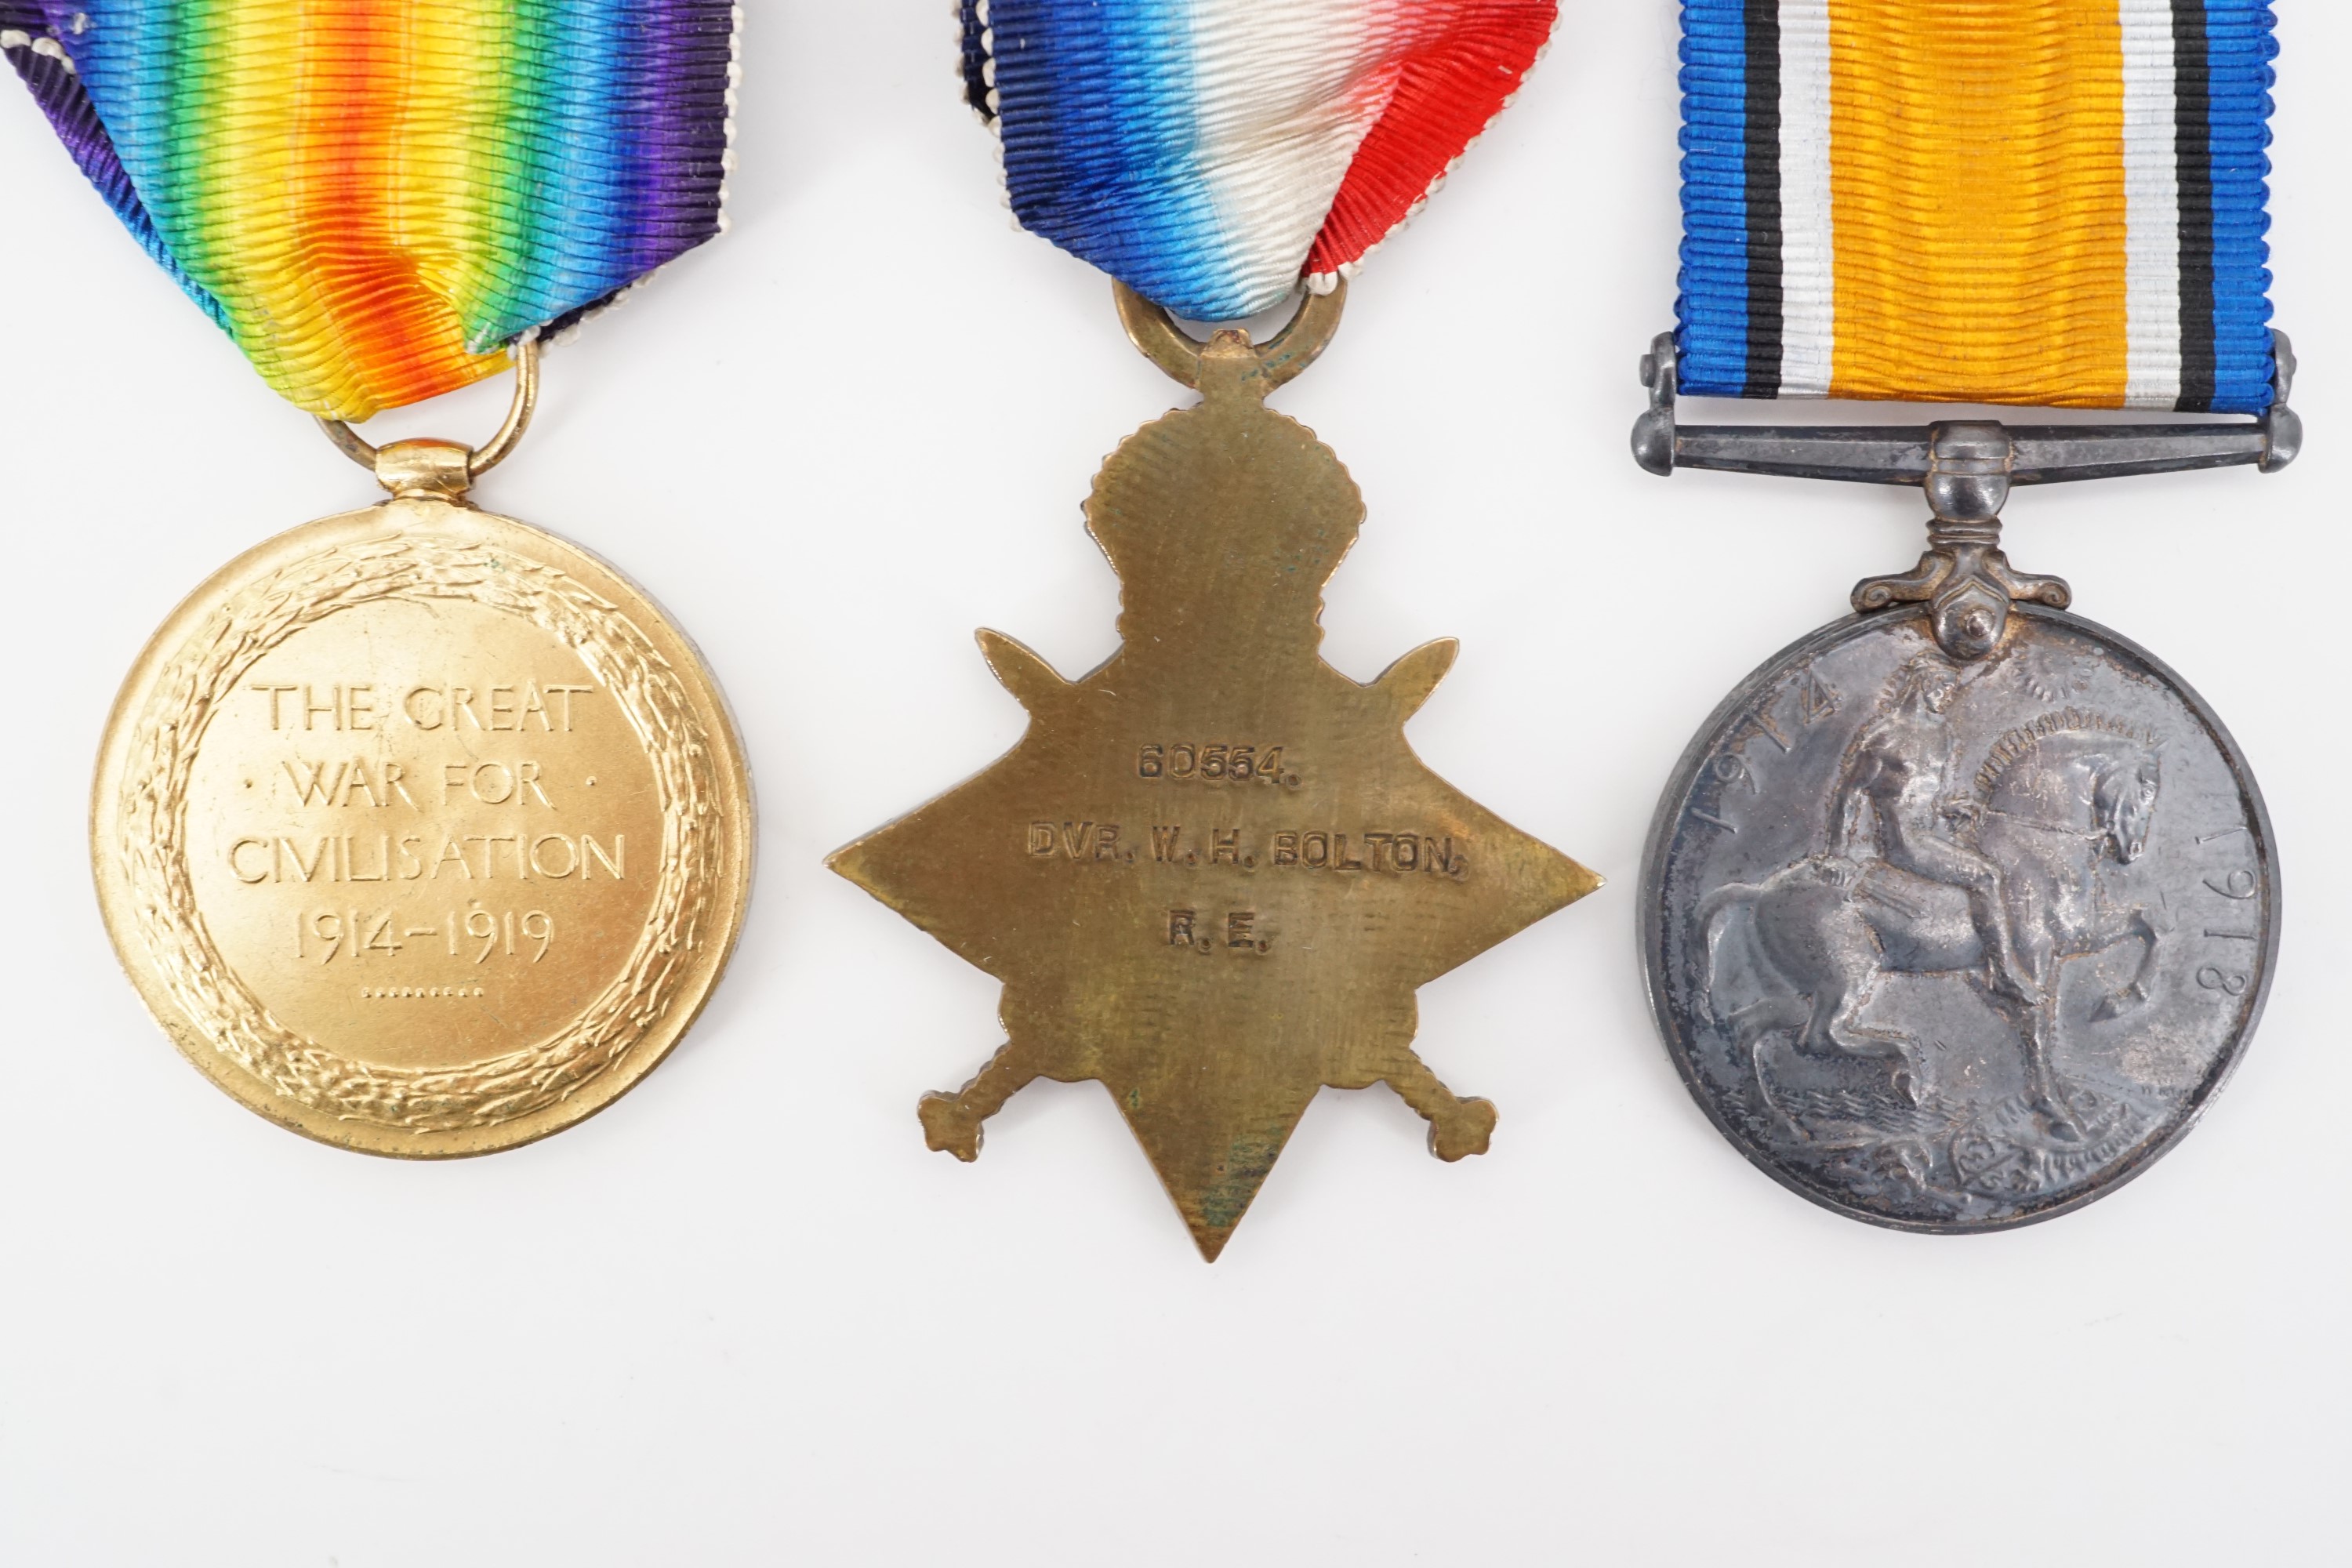 1914-15 Star, British War and Victory medals to 60554, Dvr W H Bolton, RE, with issue documents etc - Image 4 of 7